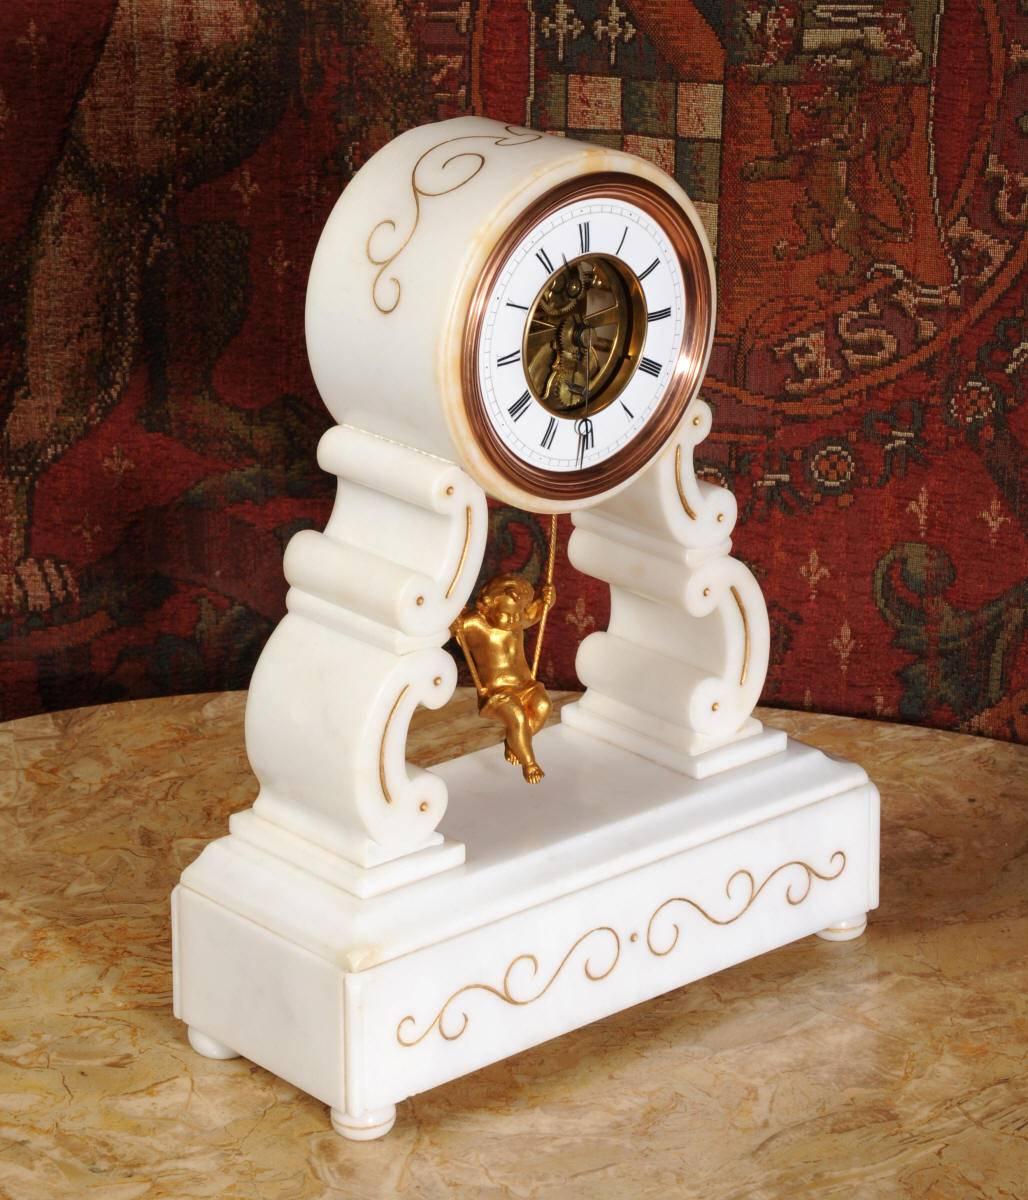 A super, fully working and tested, rare original antique French clock featuring a cherub swinging back and forth as the pendulum. It is particularly rare, being the larger version with a marble case rather than the more often seen alabaster cased